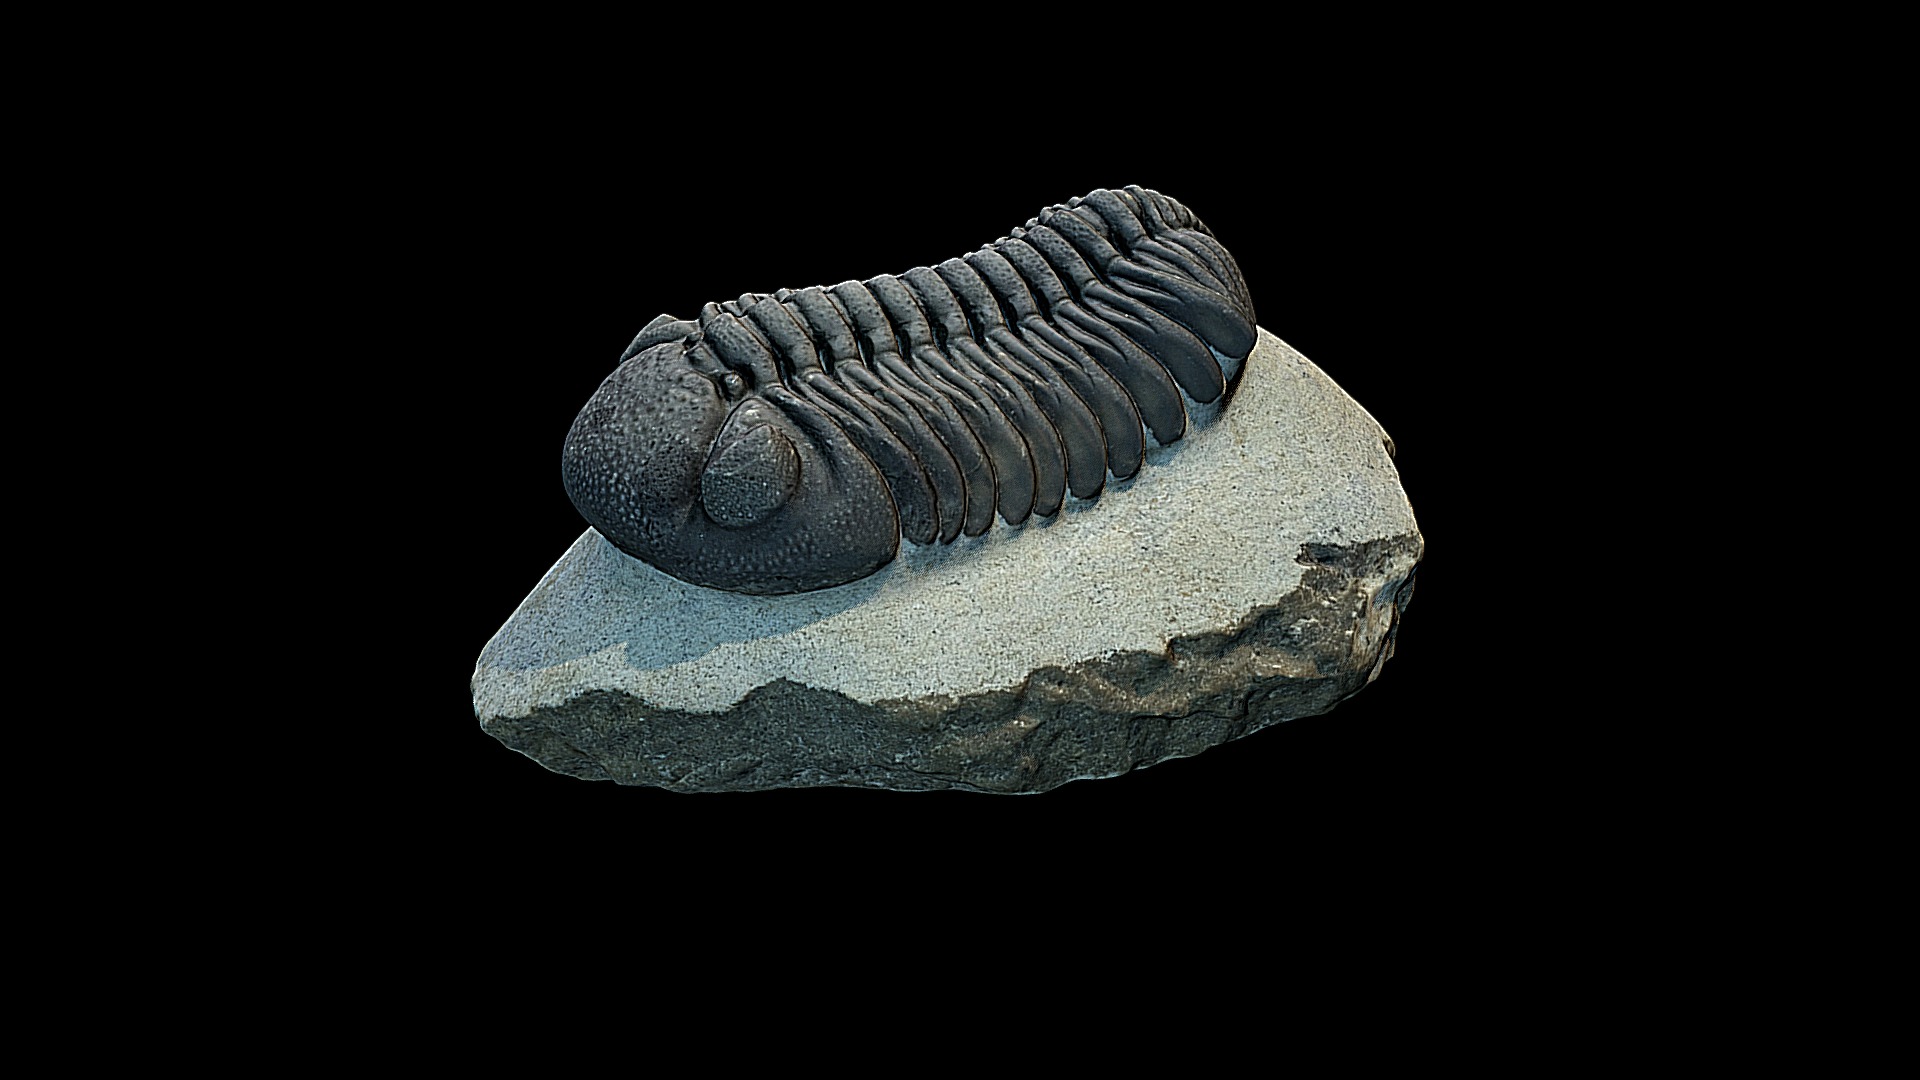 3D model Trilobite fossil - This is a 3D model of the Trilobite fossil. The 3D model is about a stone with a face carved into it.